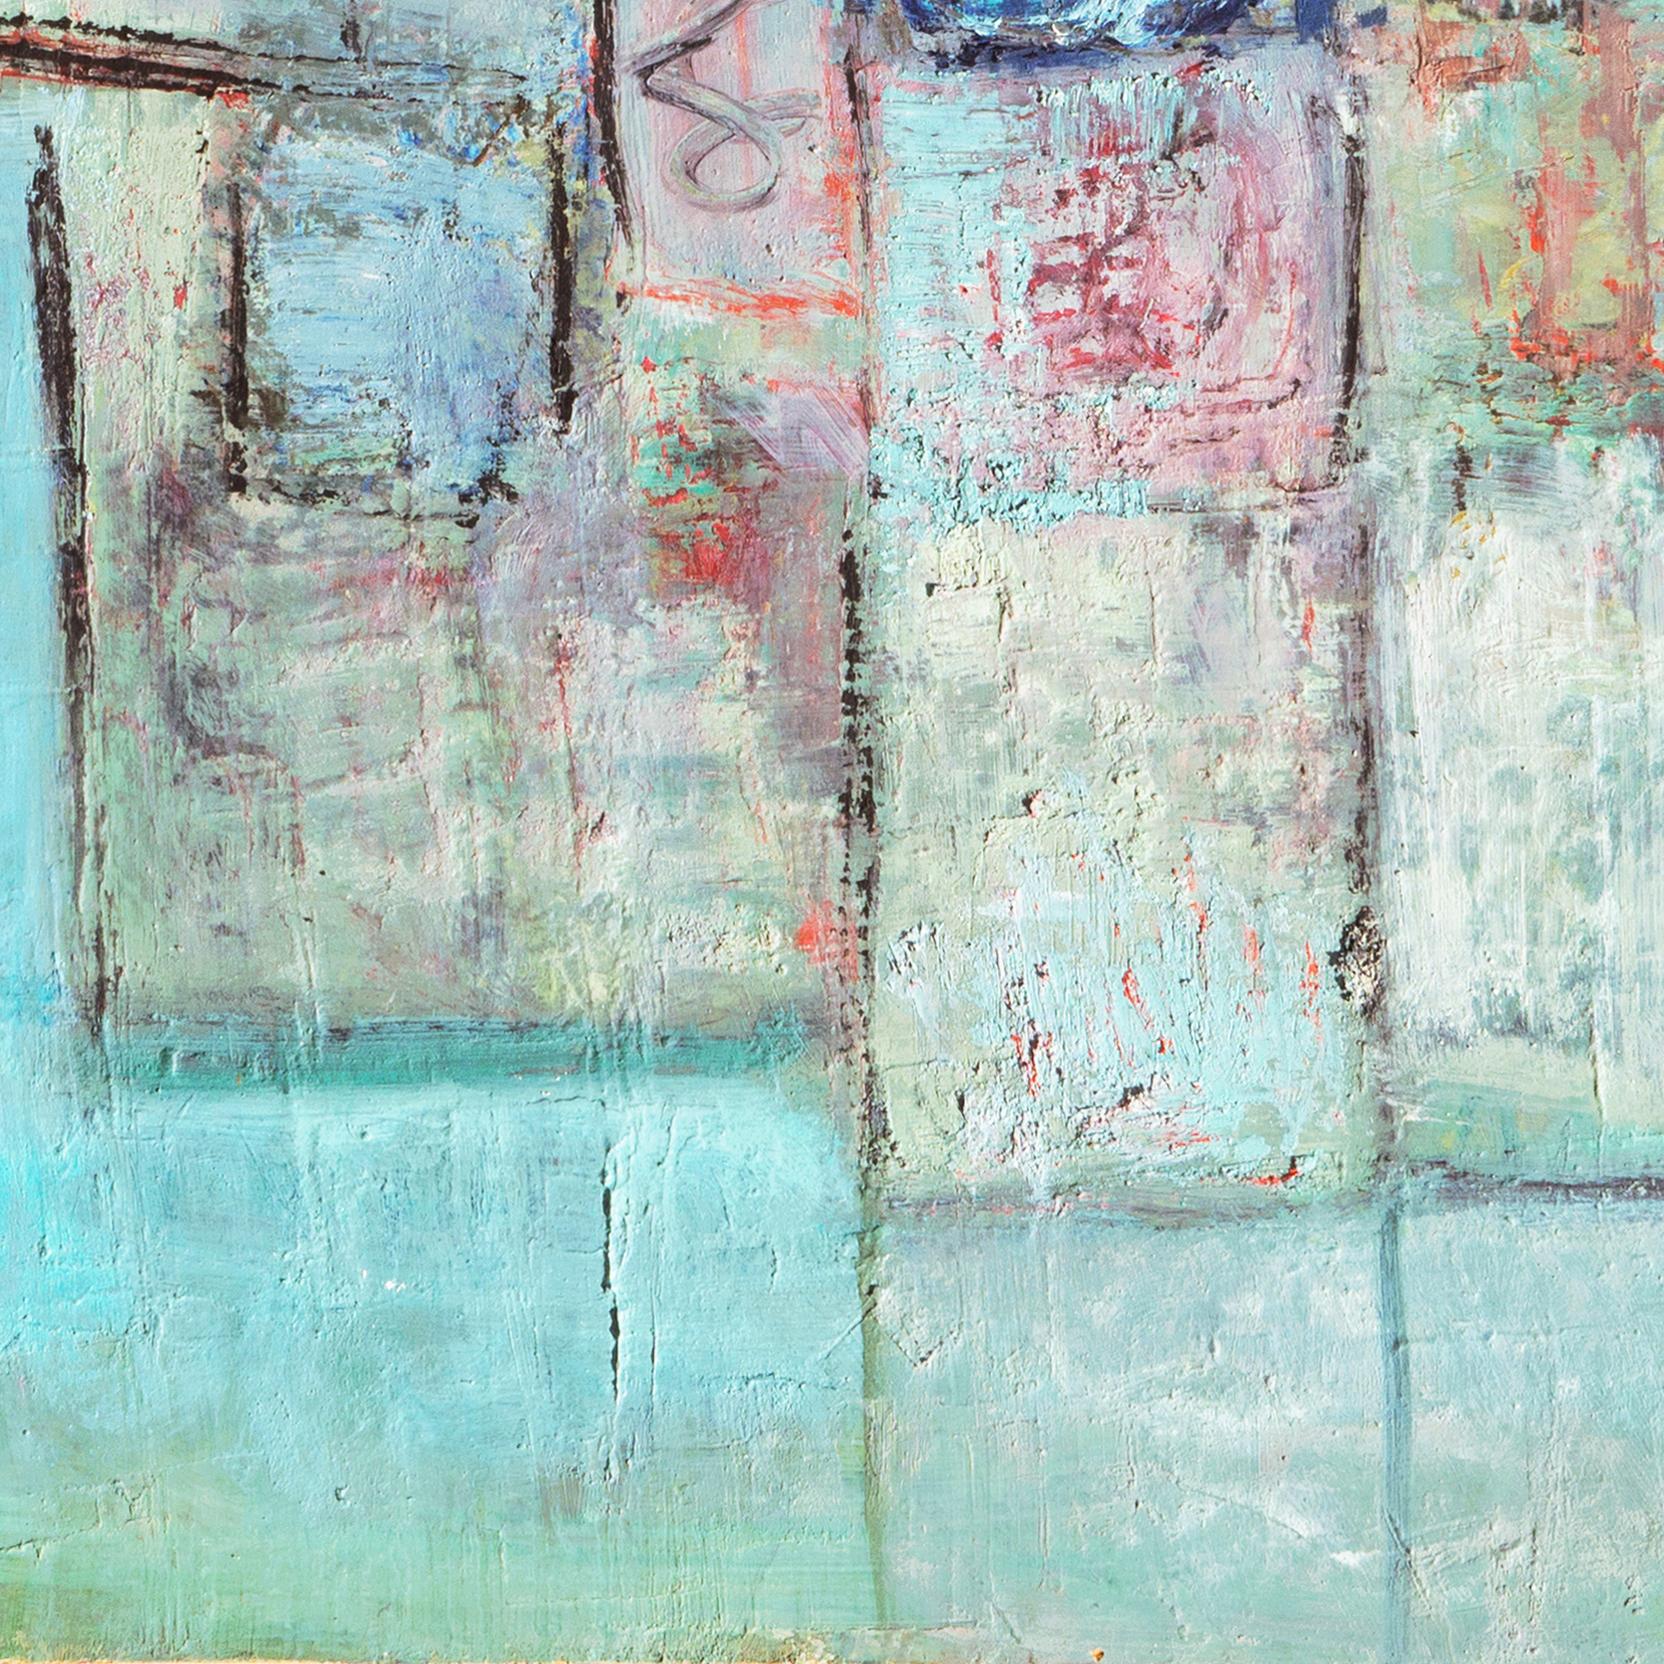 'Abstract, Turquoise and Rose', Paris Modernist, Guggenheim, Benezit, Italy 2